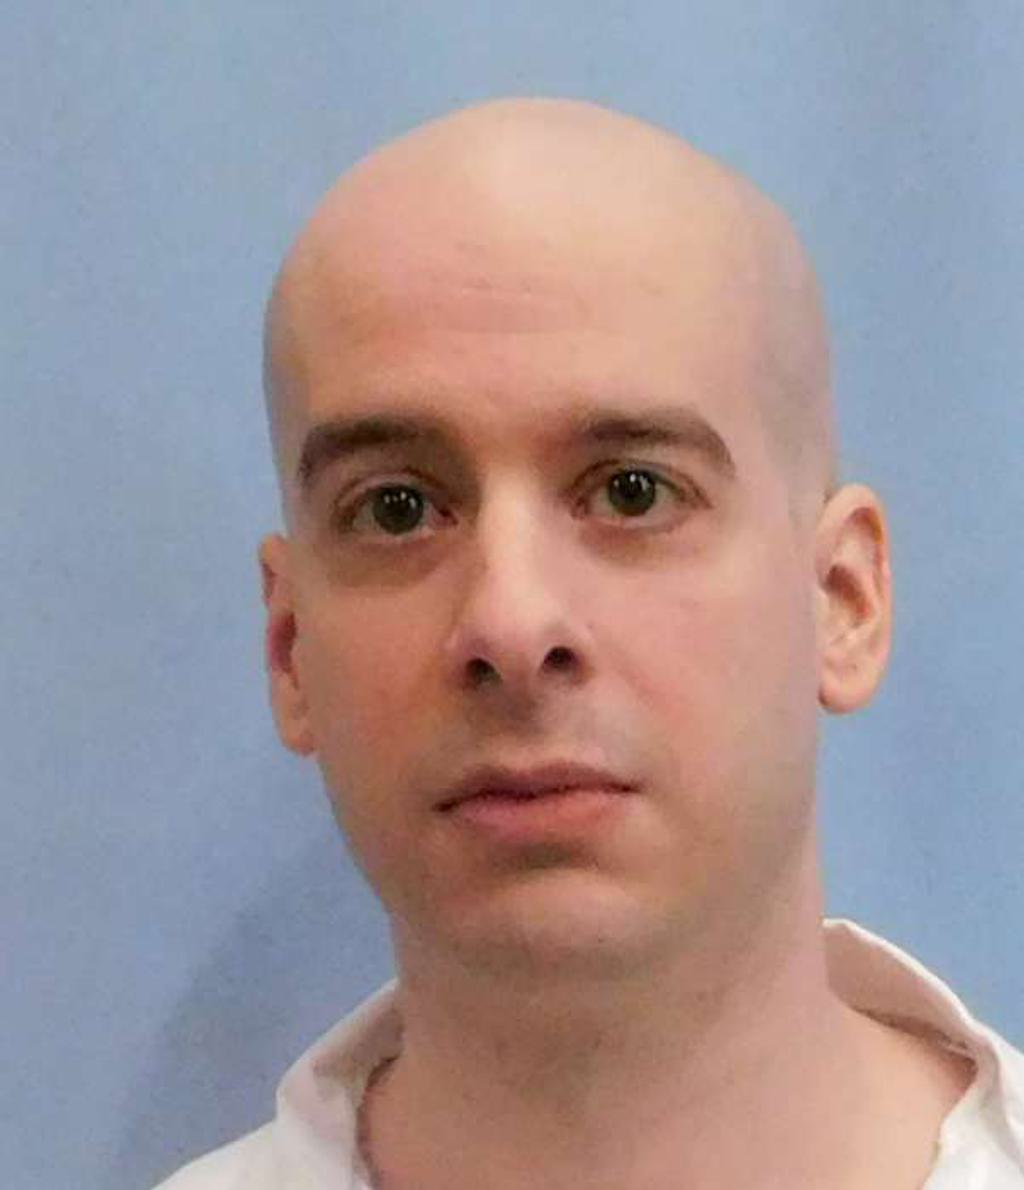 Alabama Prisoner Seeks Stay, Reprieve to Challenge the Death Penalty for 19-Year-Old Offenders